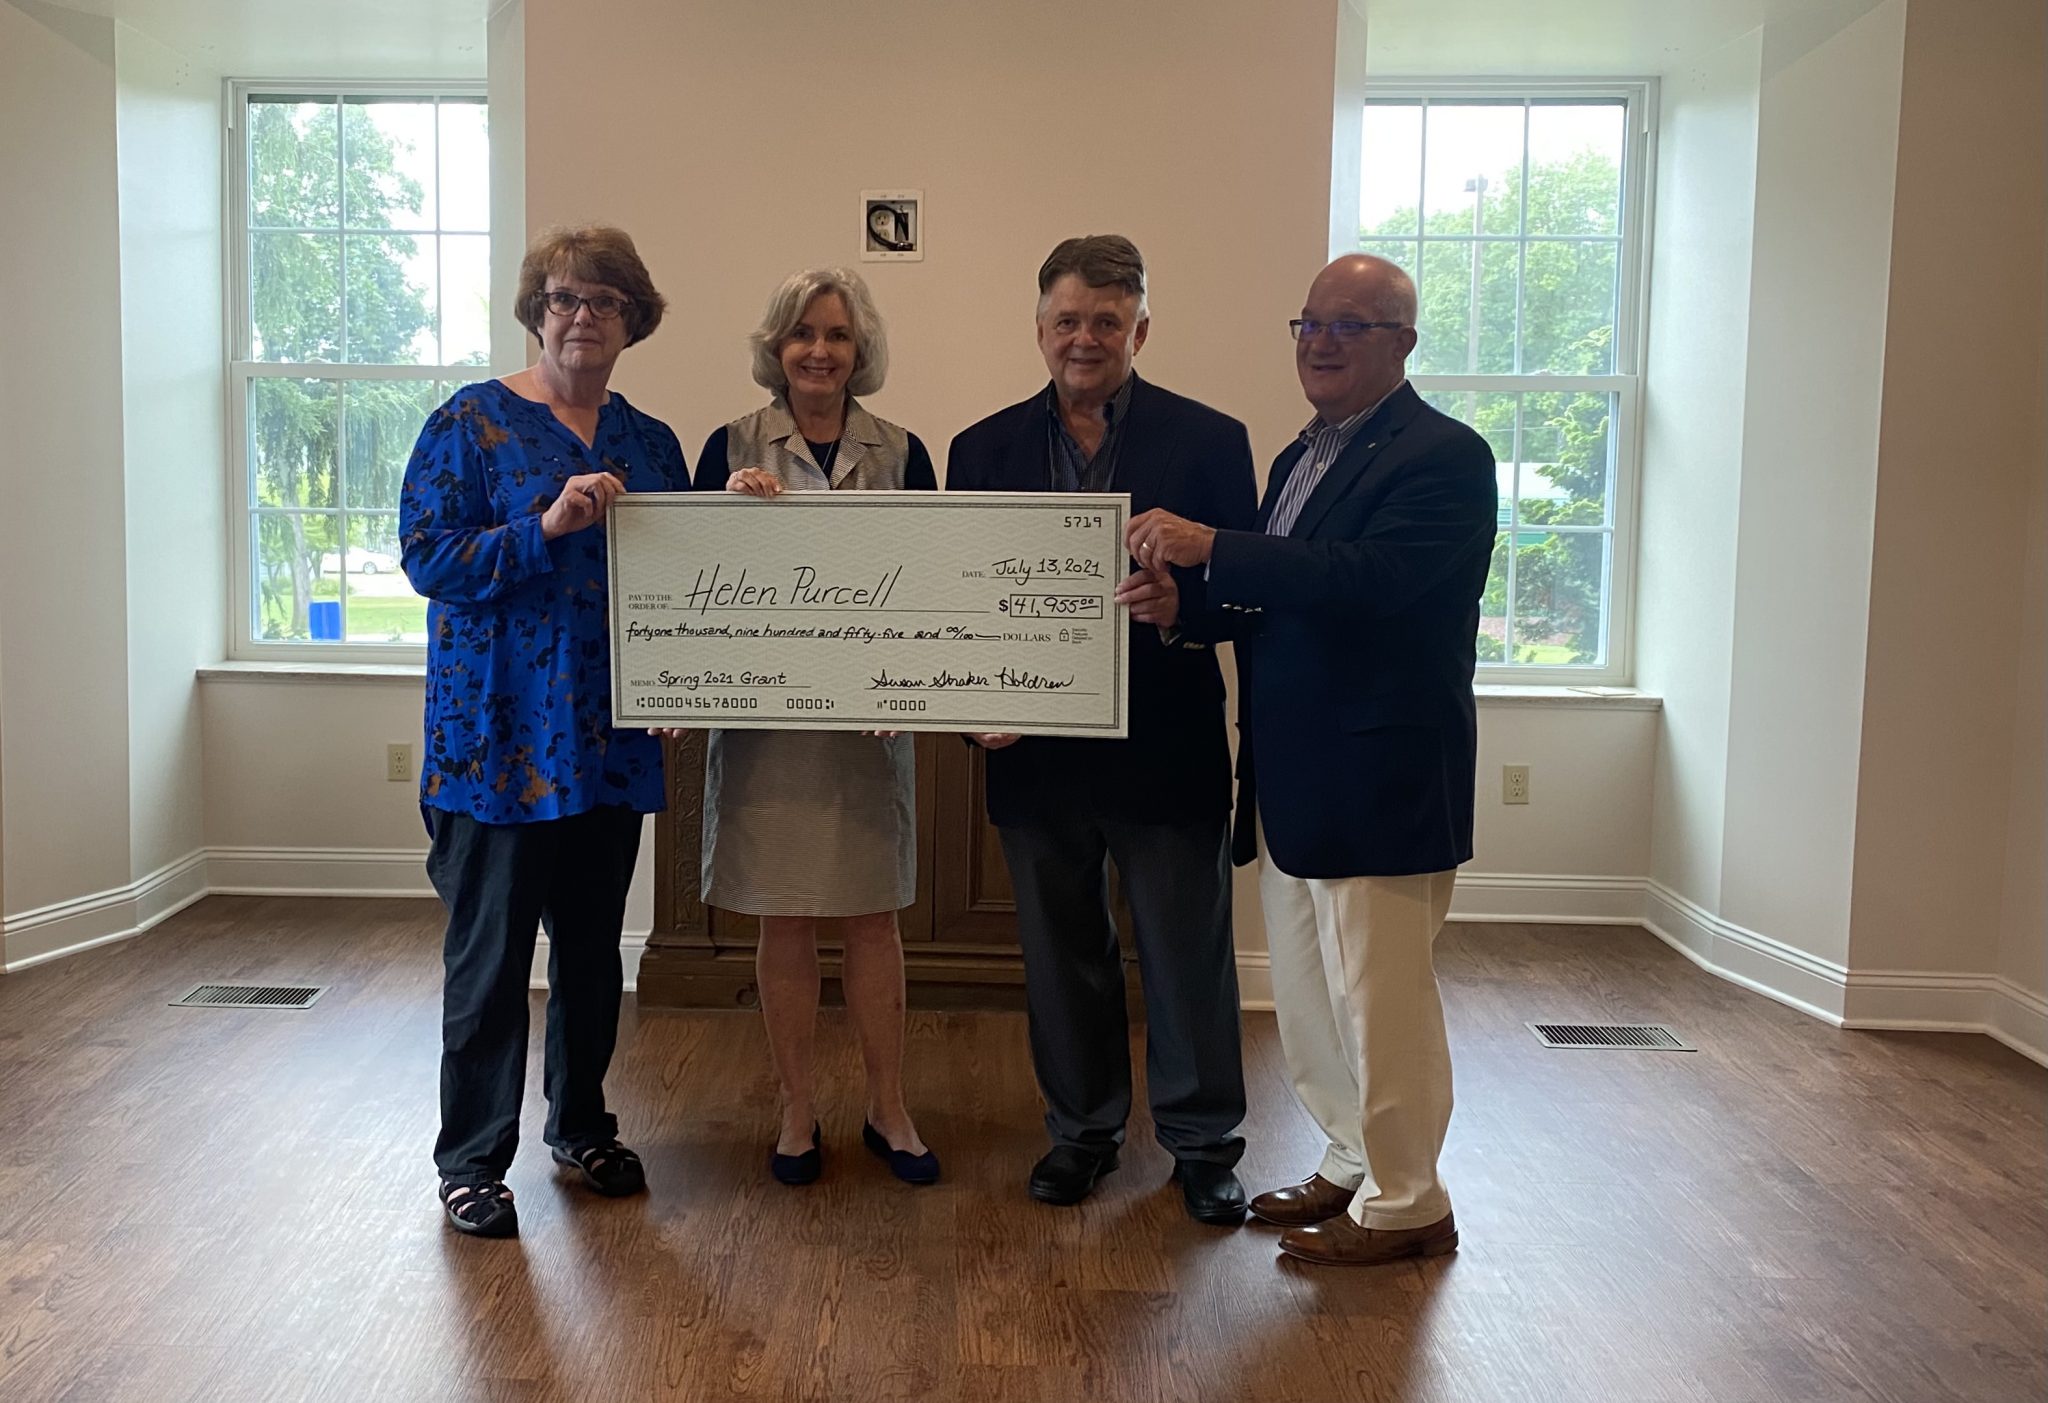 Helen Purcell Home receives Grant from Straker Foundation